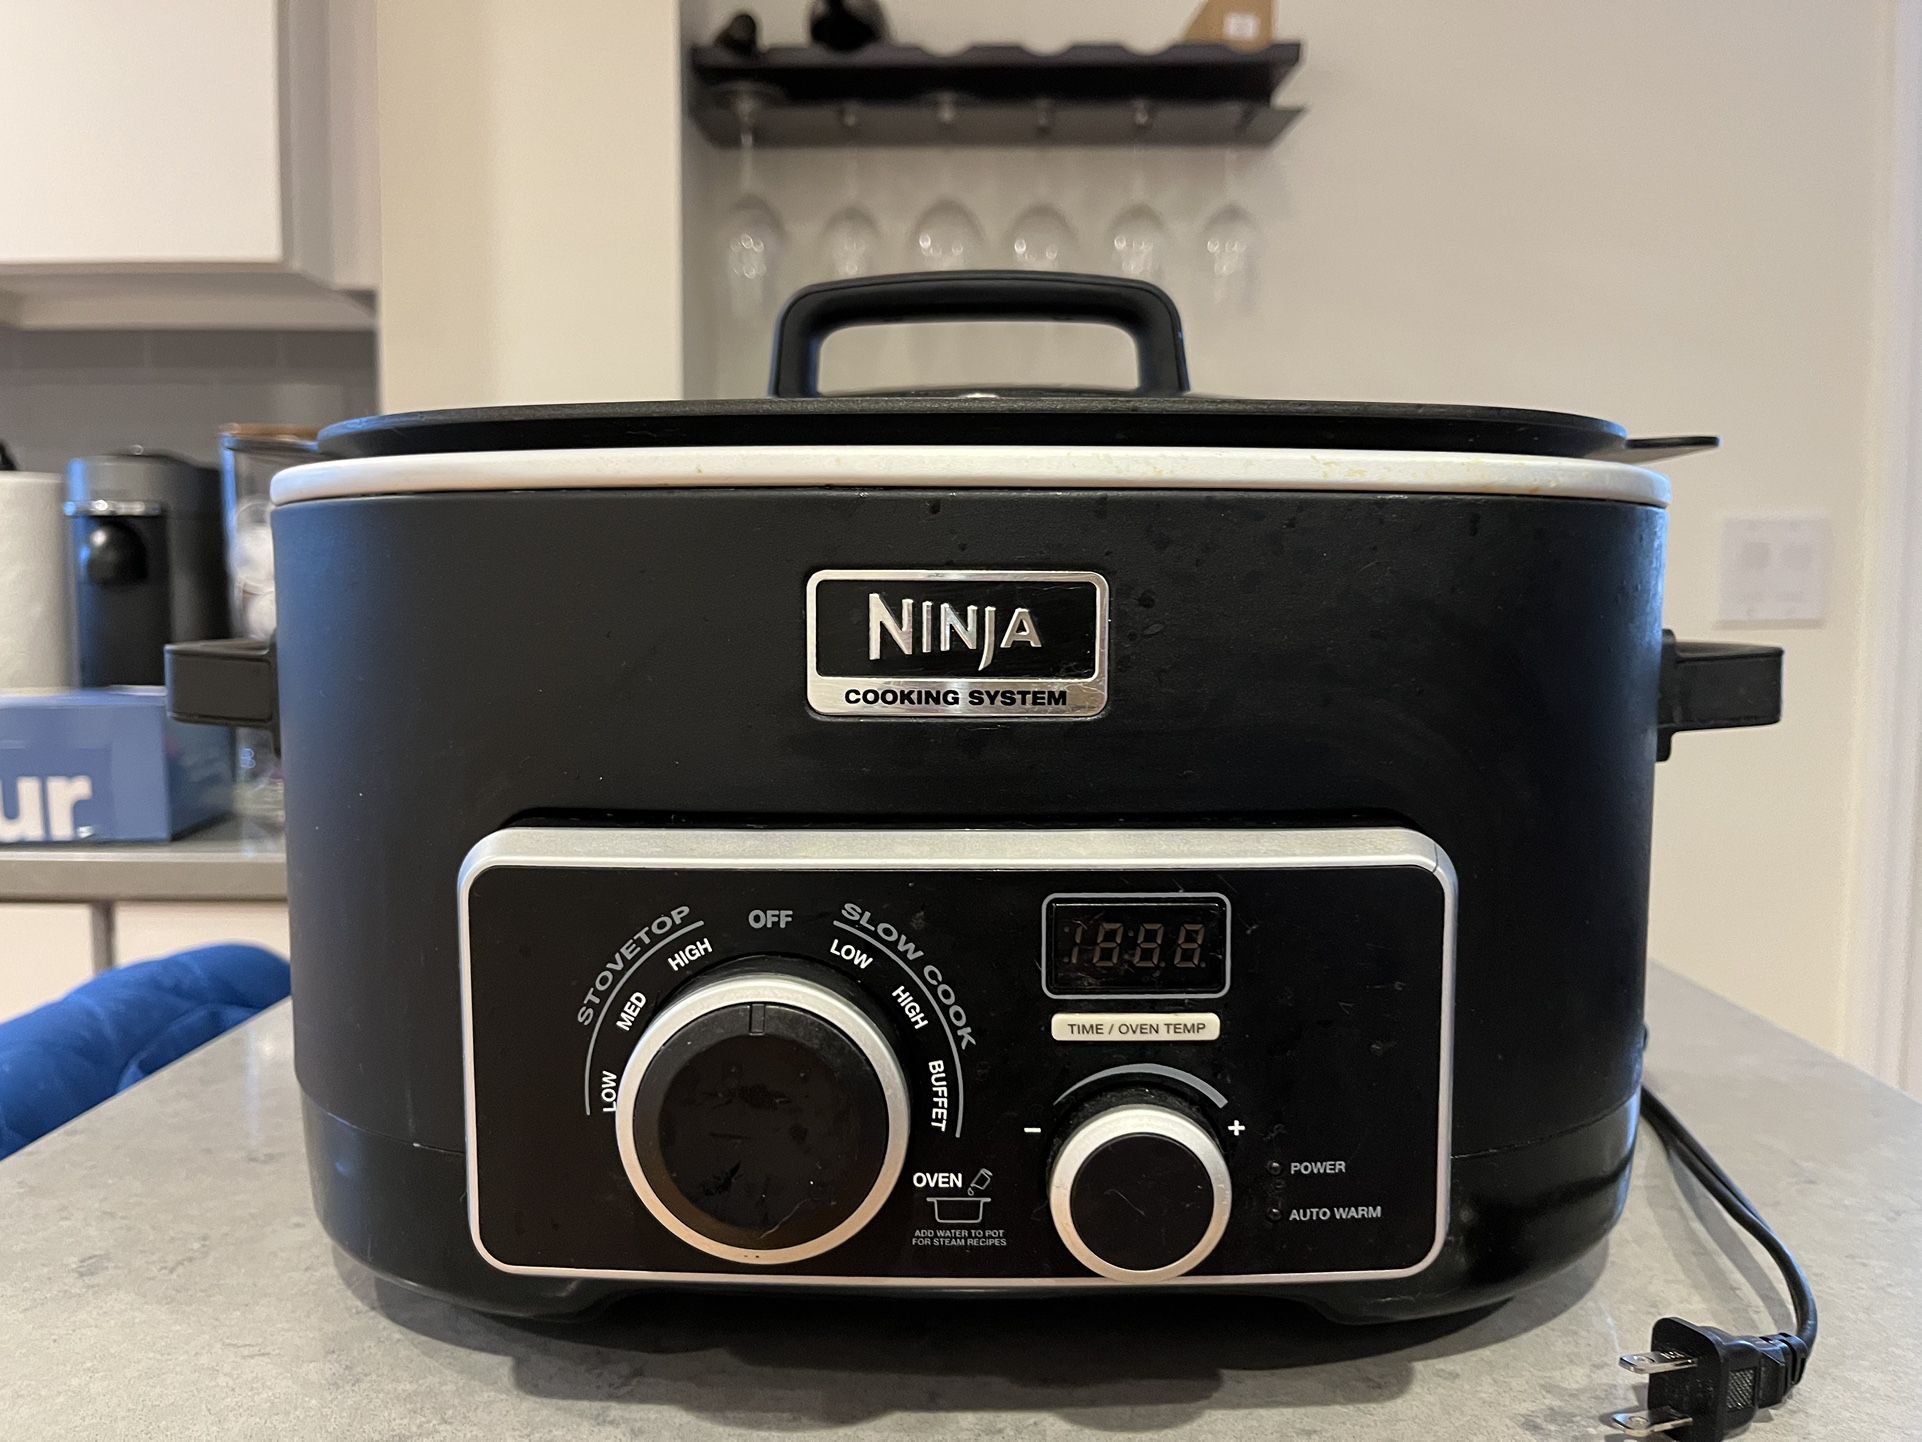 Ninja 3-in-1 6-qt. Cooking System (Model no. MC751) for Sale in Arlington,  MA - OfferUp